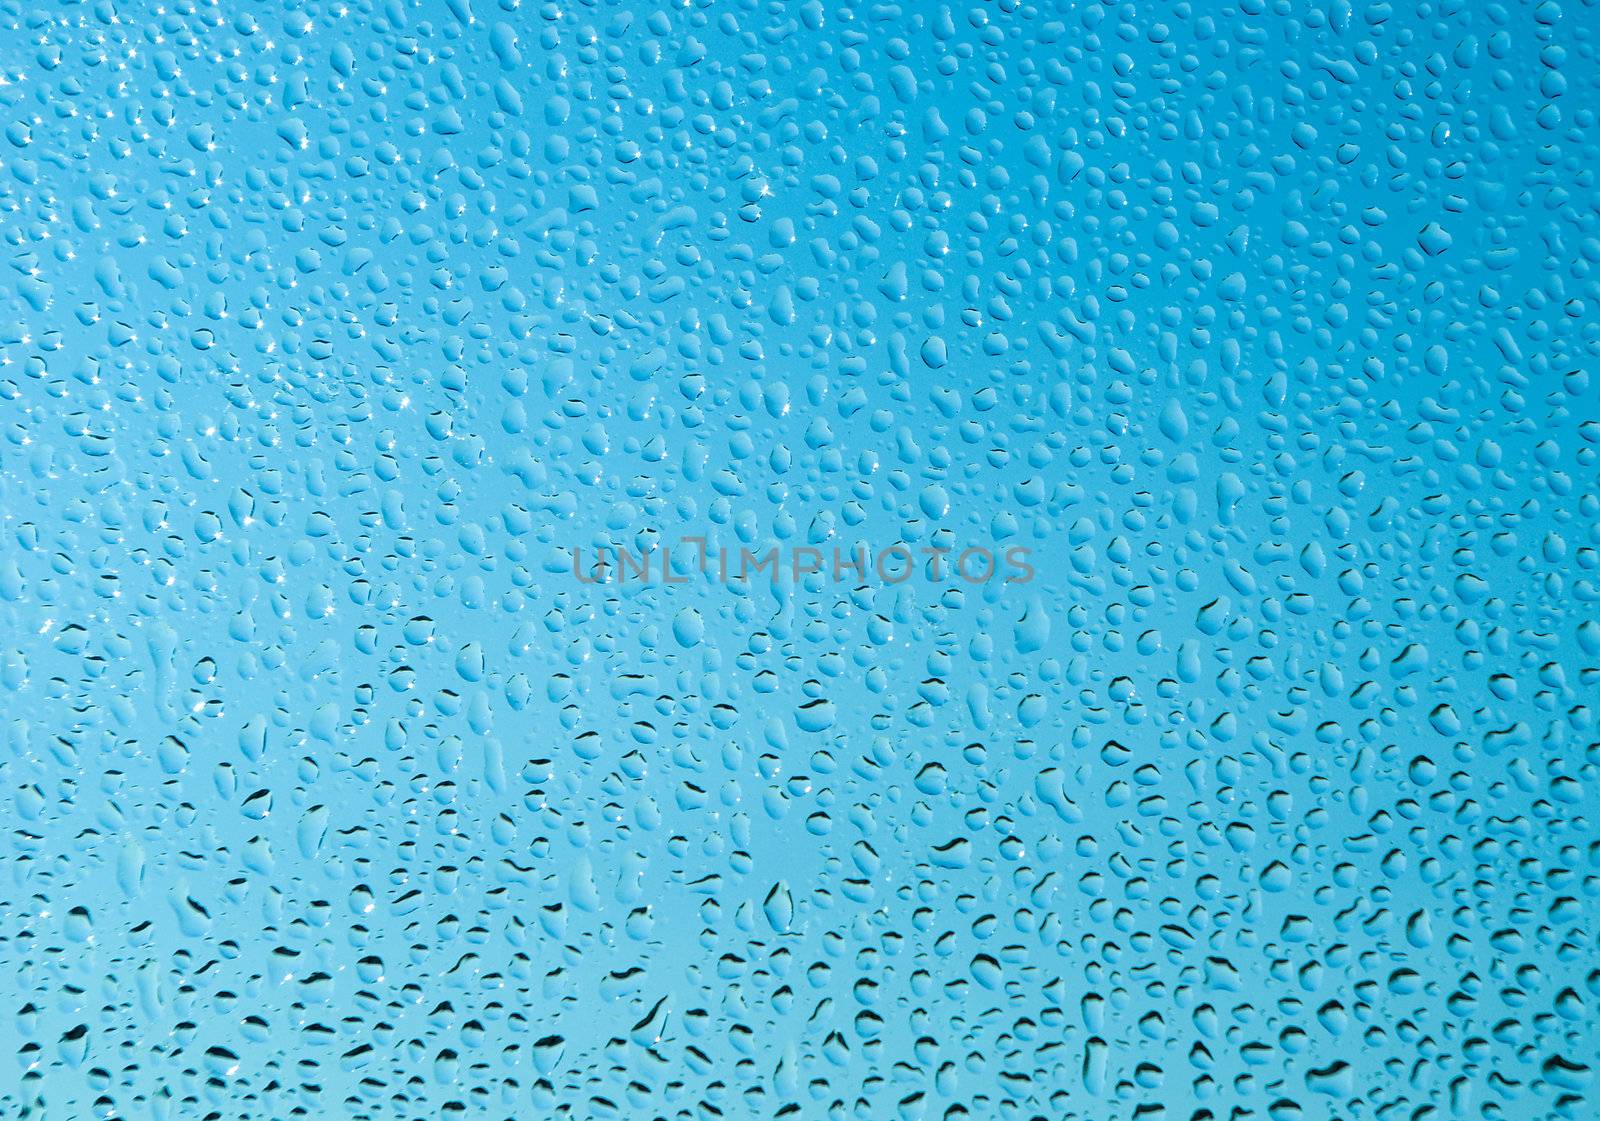 Waterdrop Close-up clear drops of water on window glass surface

